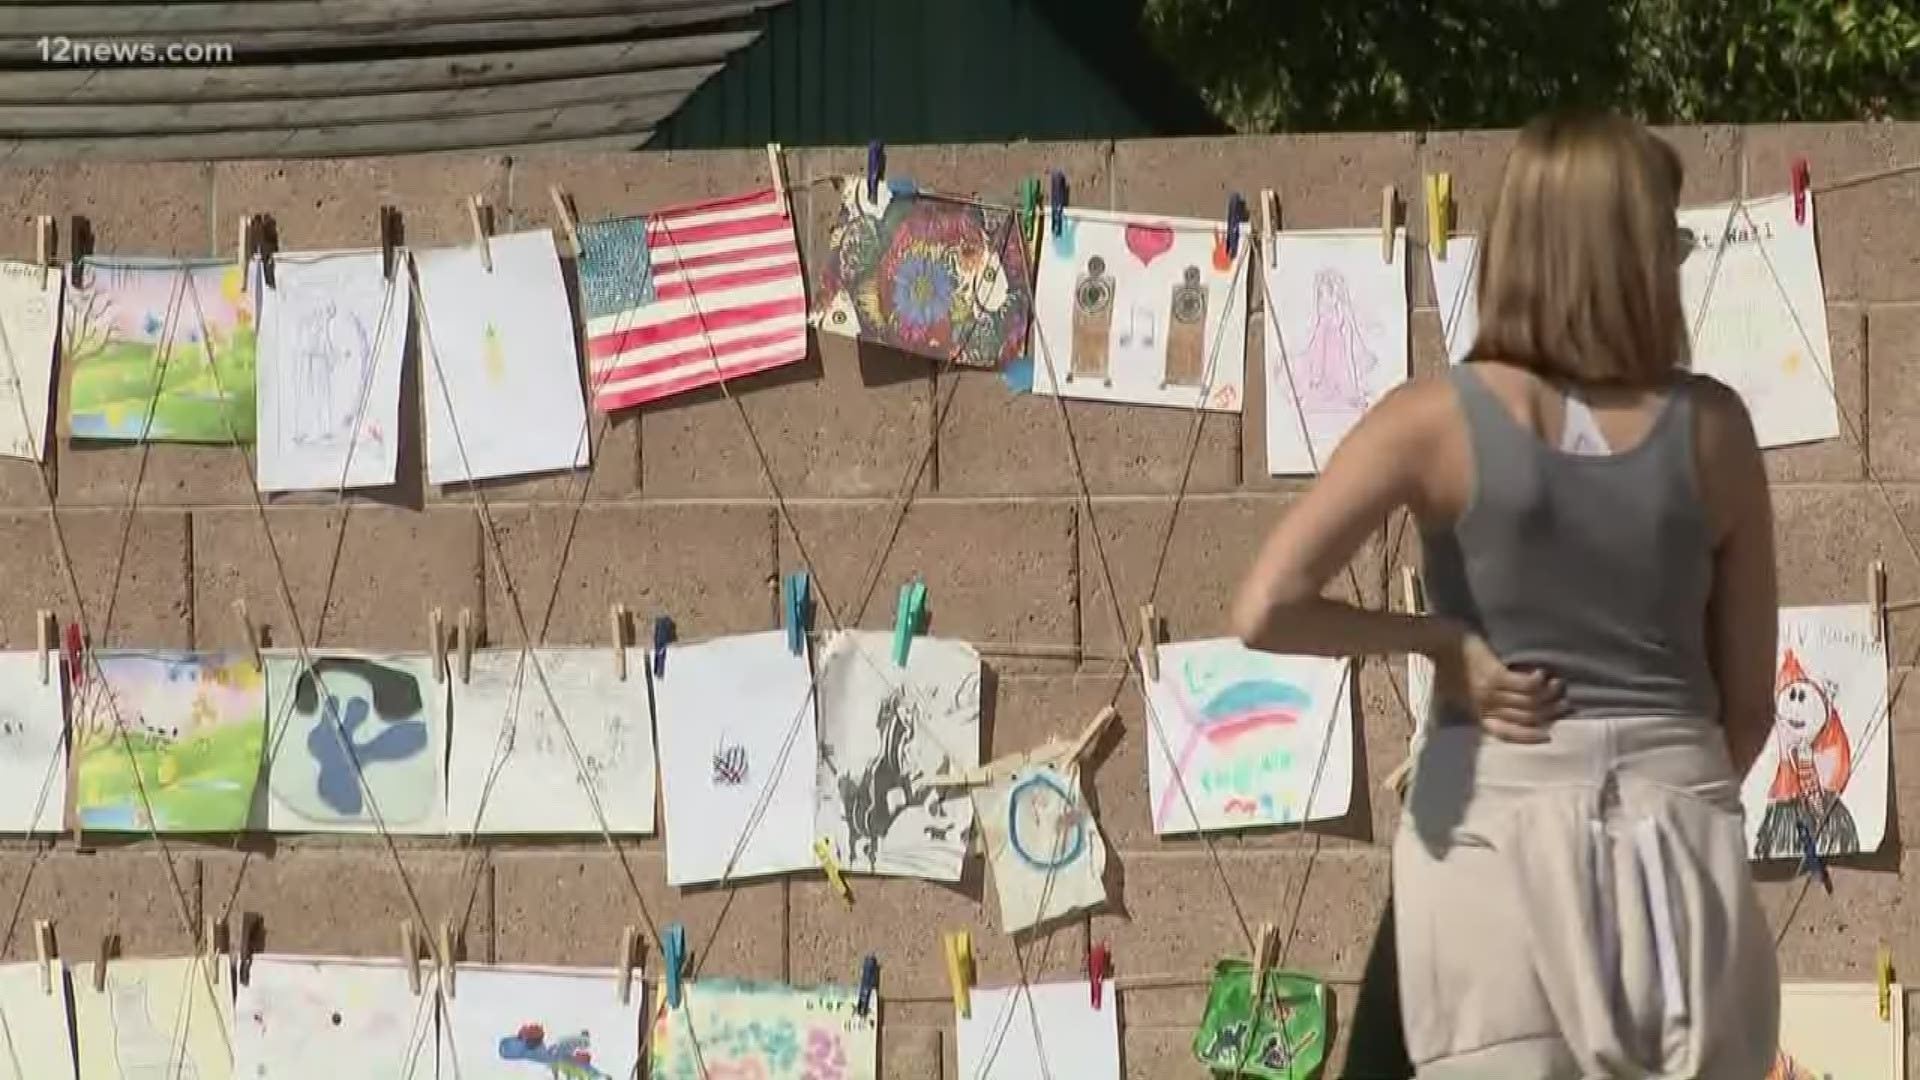 A Mesa girl is bringing her neighborhood together through art. She started putting up her own art on a wall and posted a sign saying her neighbors should do the same